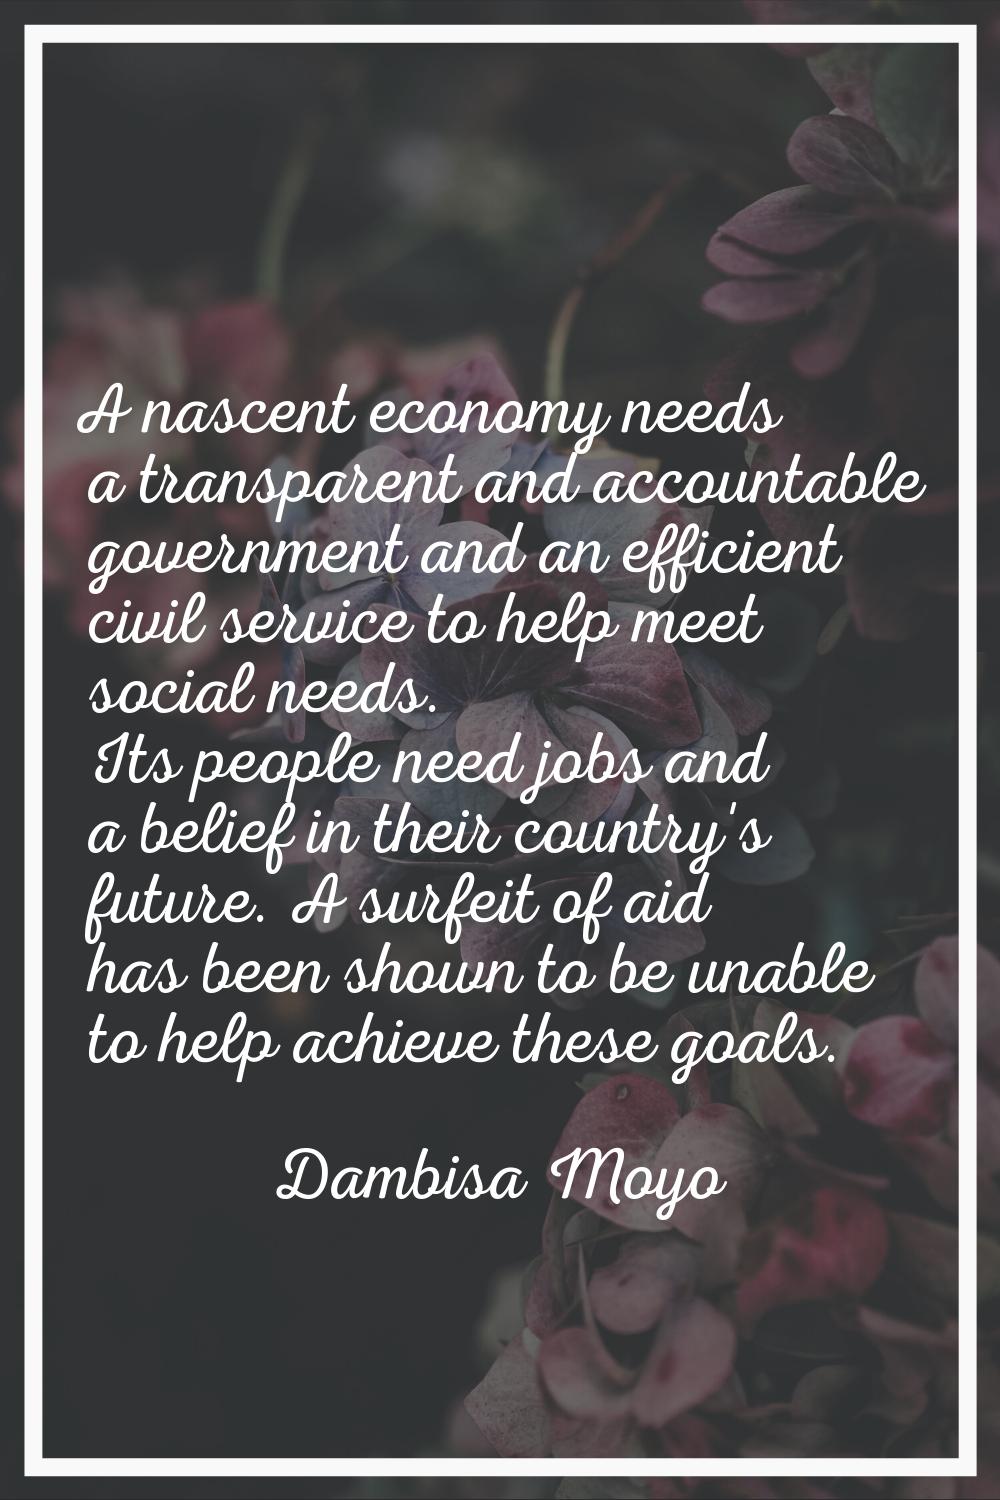 A nascent economy needs a transparent and accountable government and an efficient civil service to 